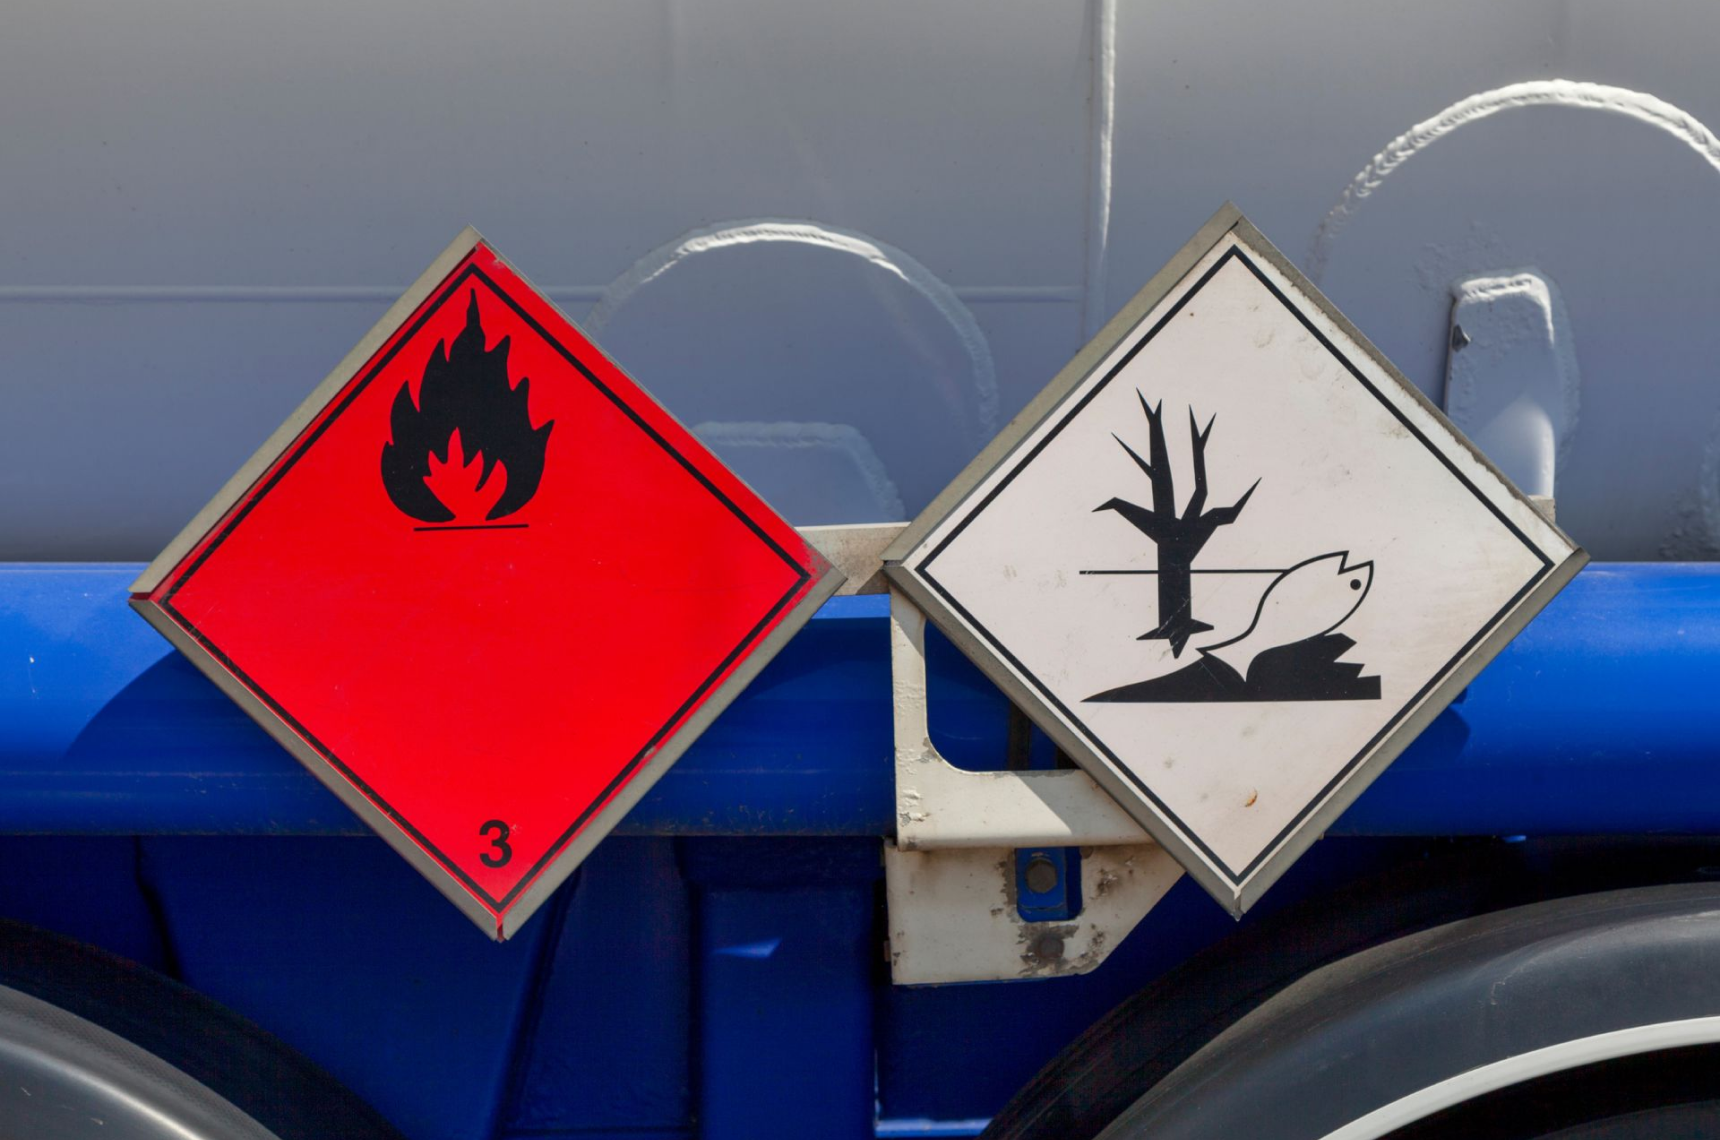  Warning signs for the transport of dangerous goods 